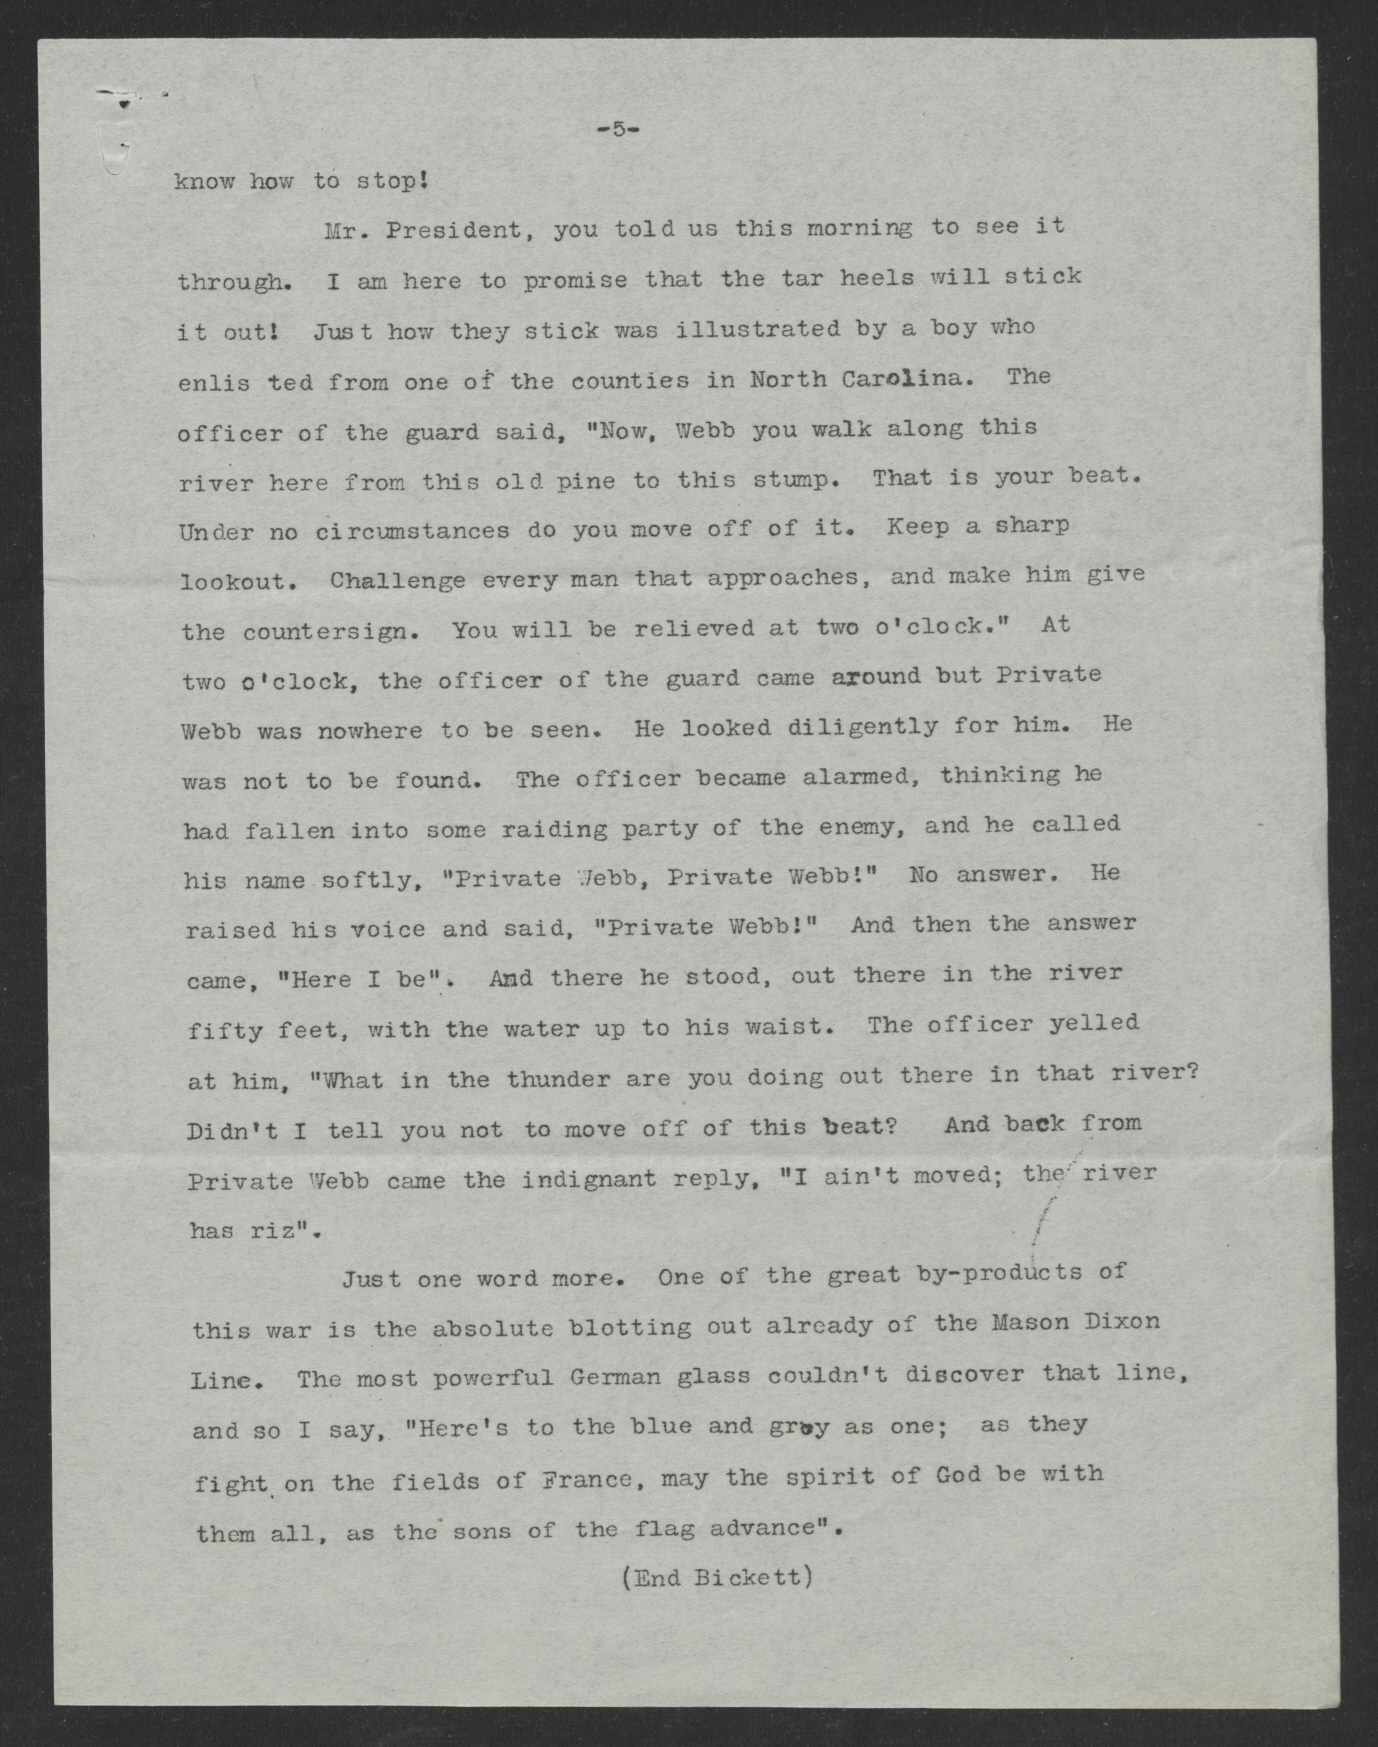 Address Delivered to the Conference of Governors by Governor Thomas W. Bickett, May 17, 1918, page 5